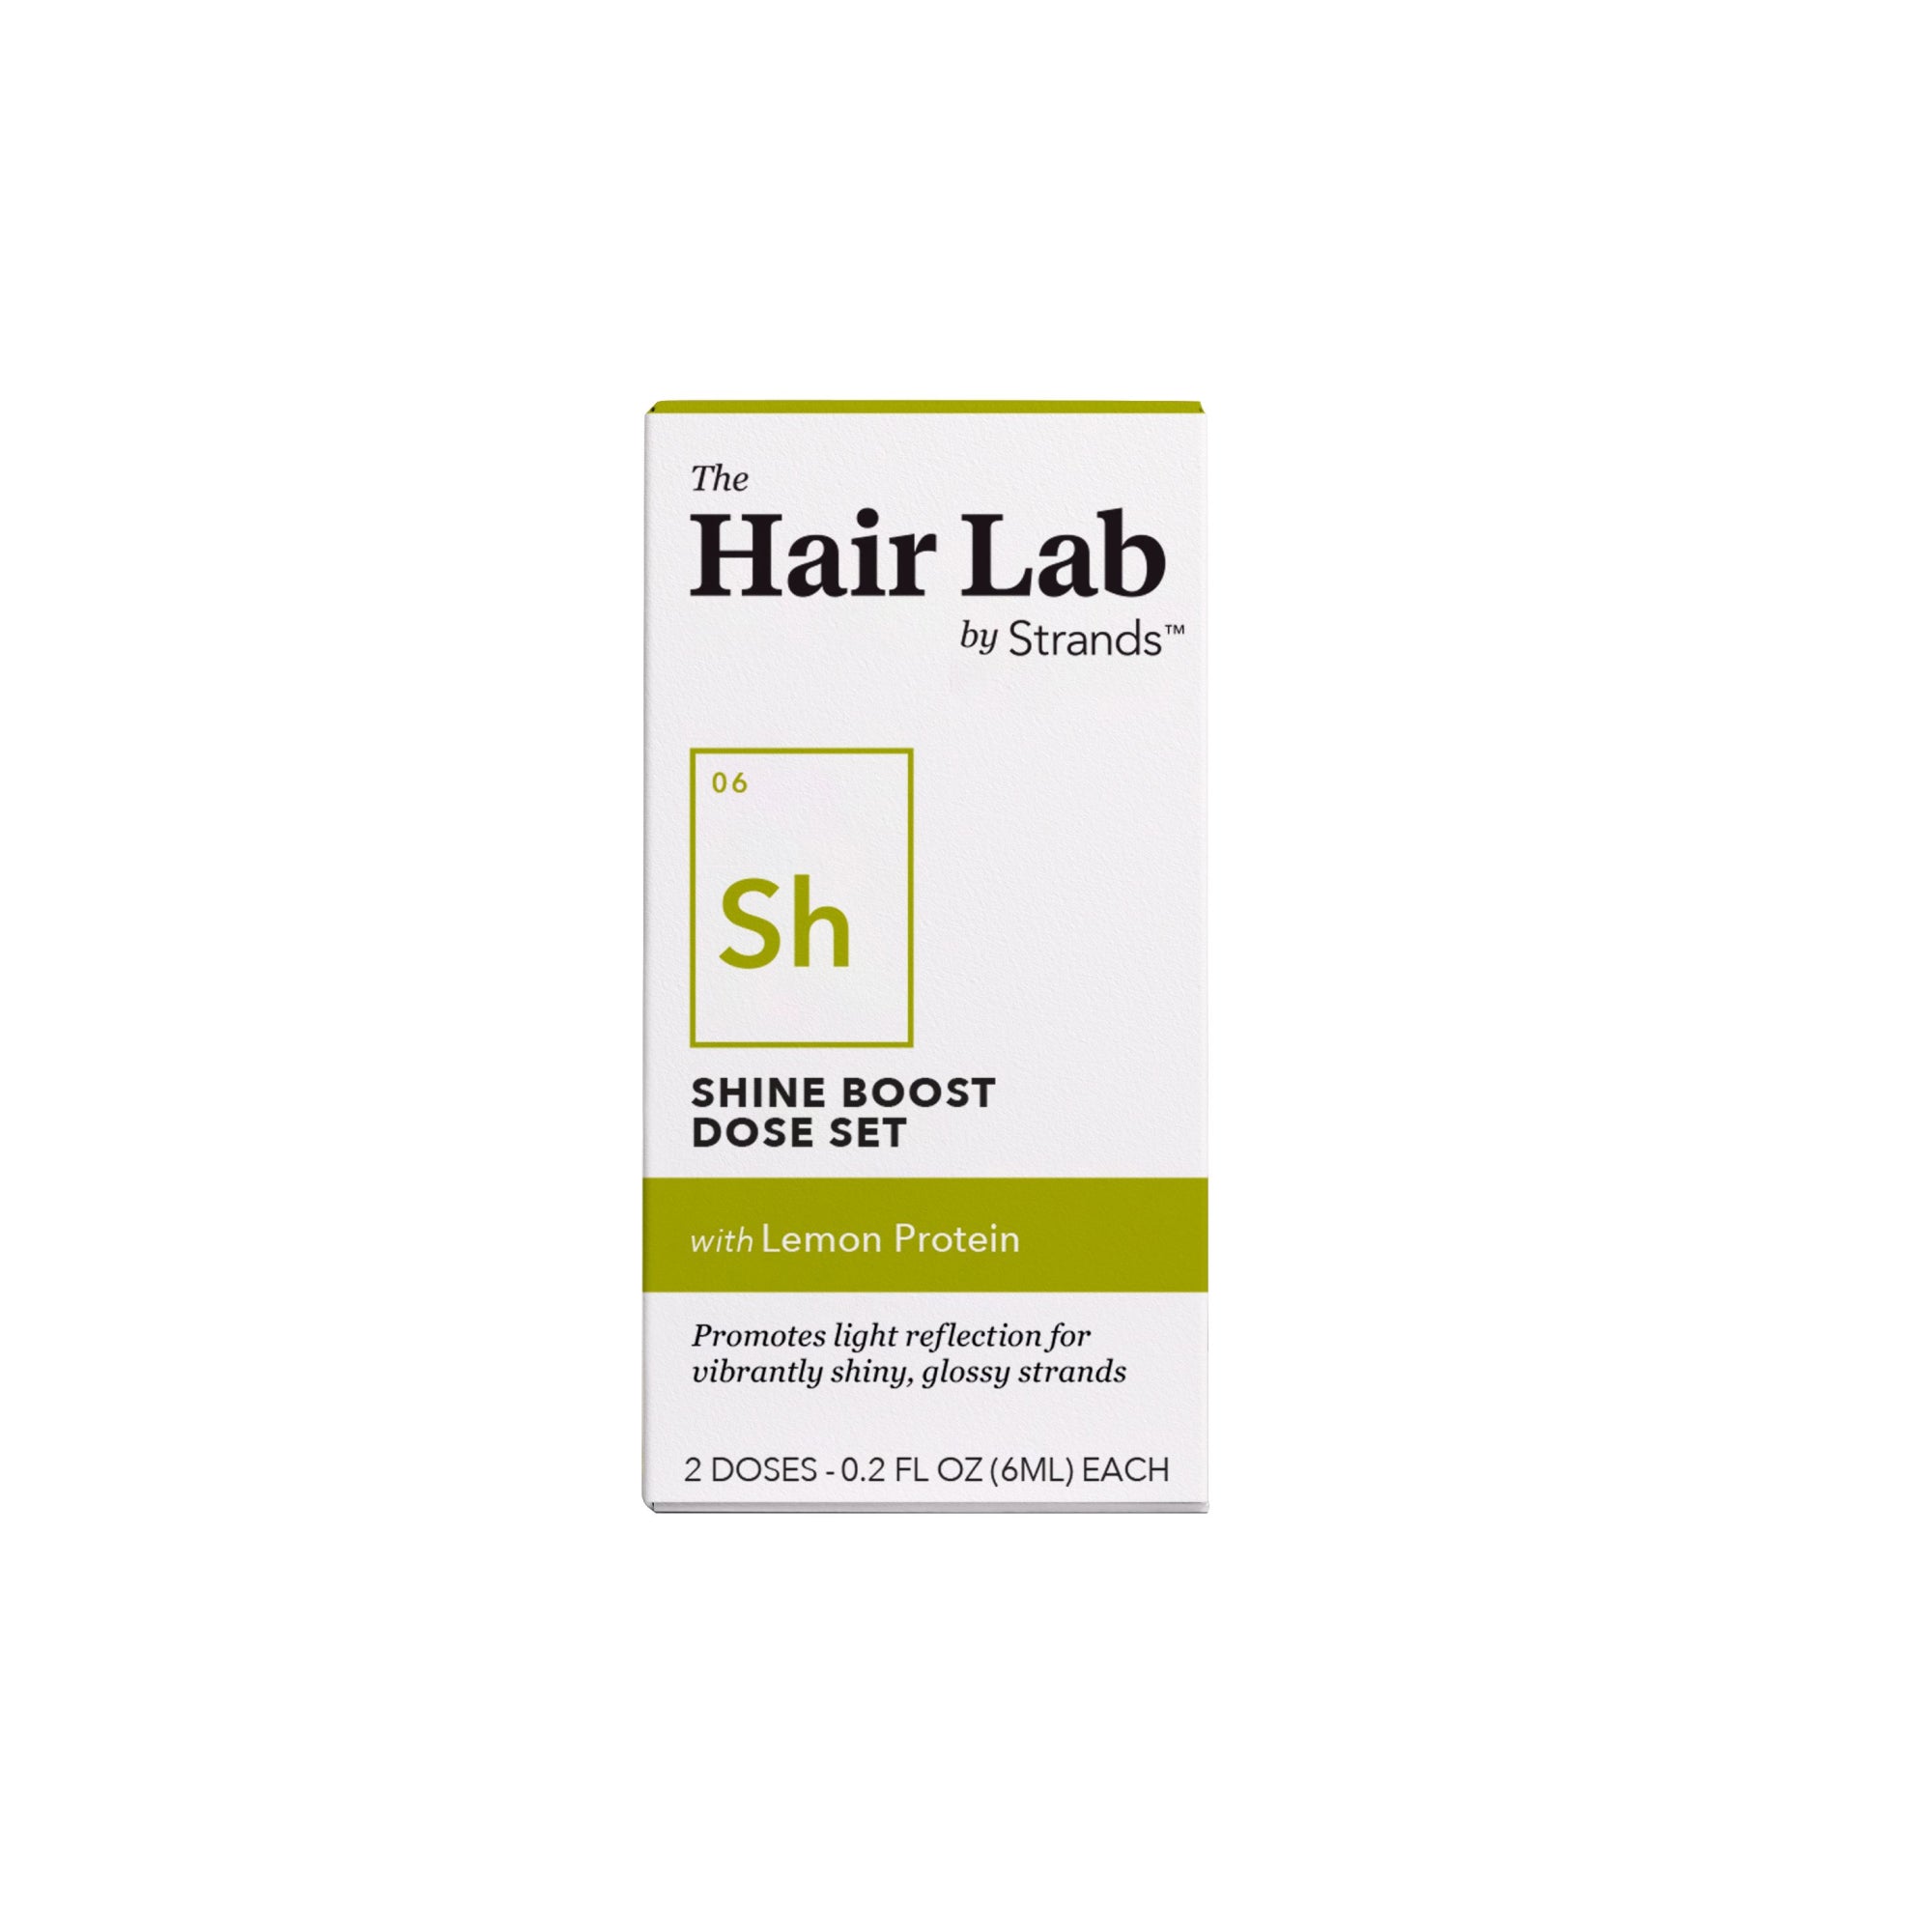 Shine Boost Dose Set – The Hair Lab by Strands